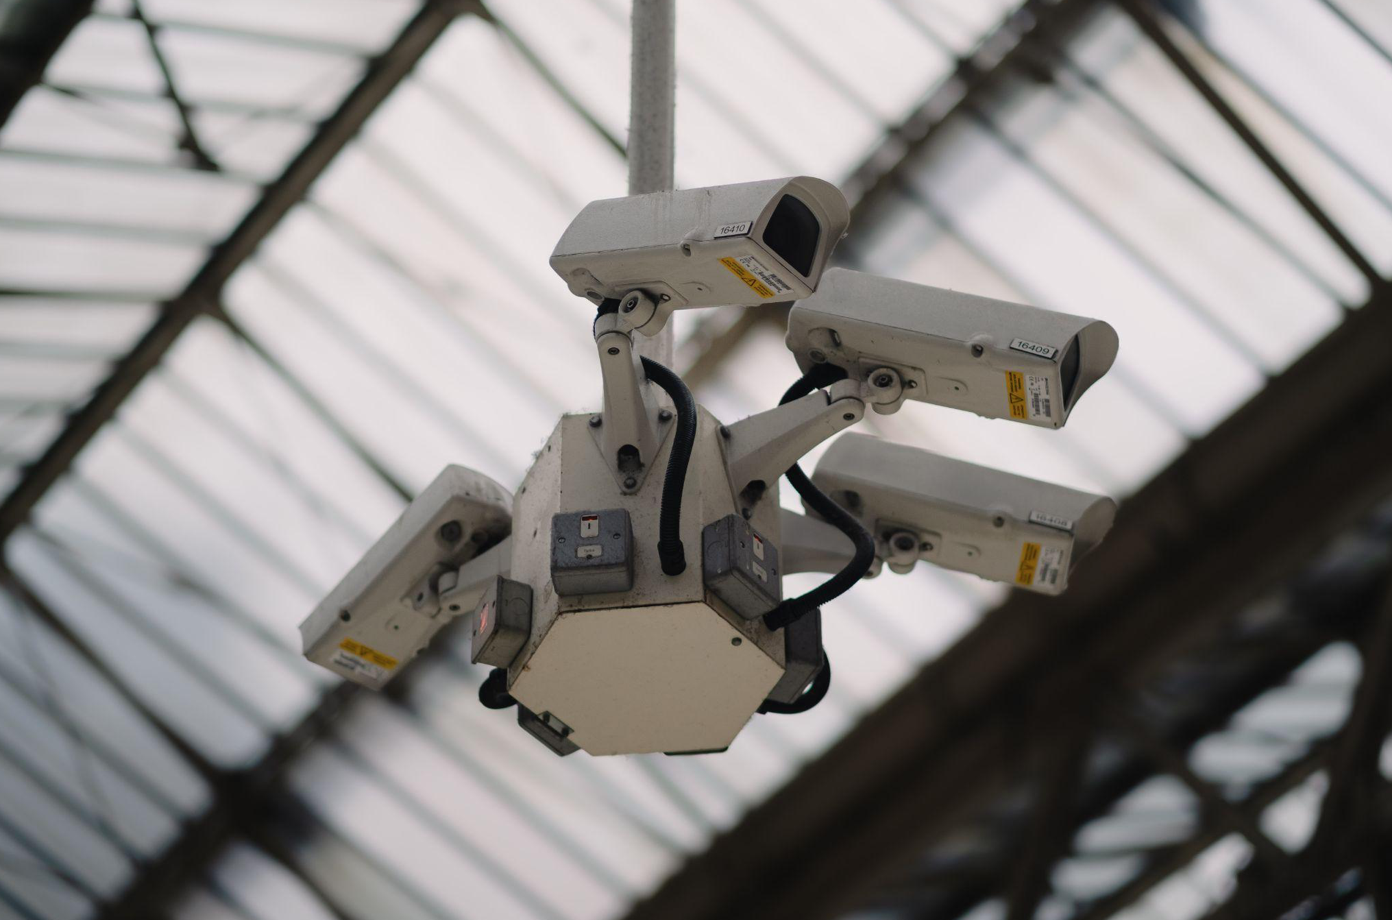 Cluster of four cameras mounted on ceiling; image by Levi Meir Clancy, via Unsplash.com.